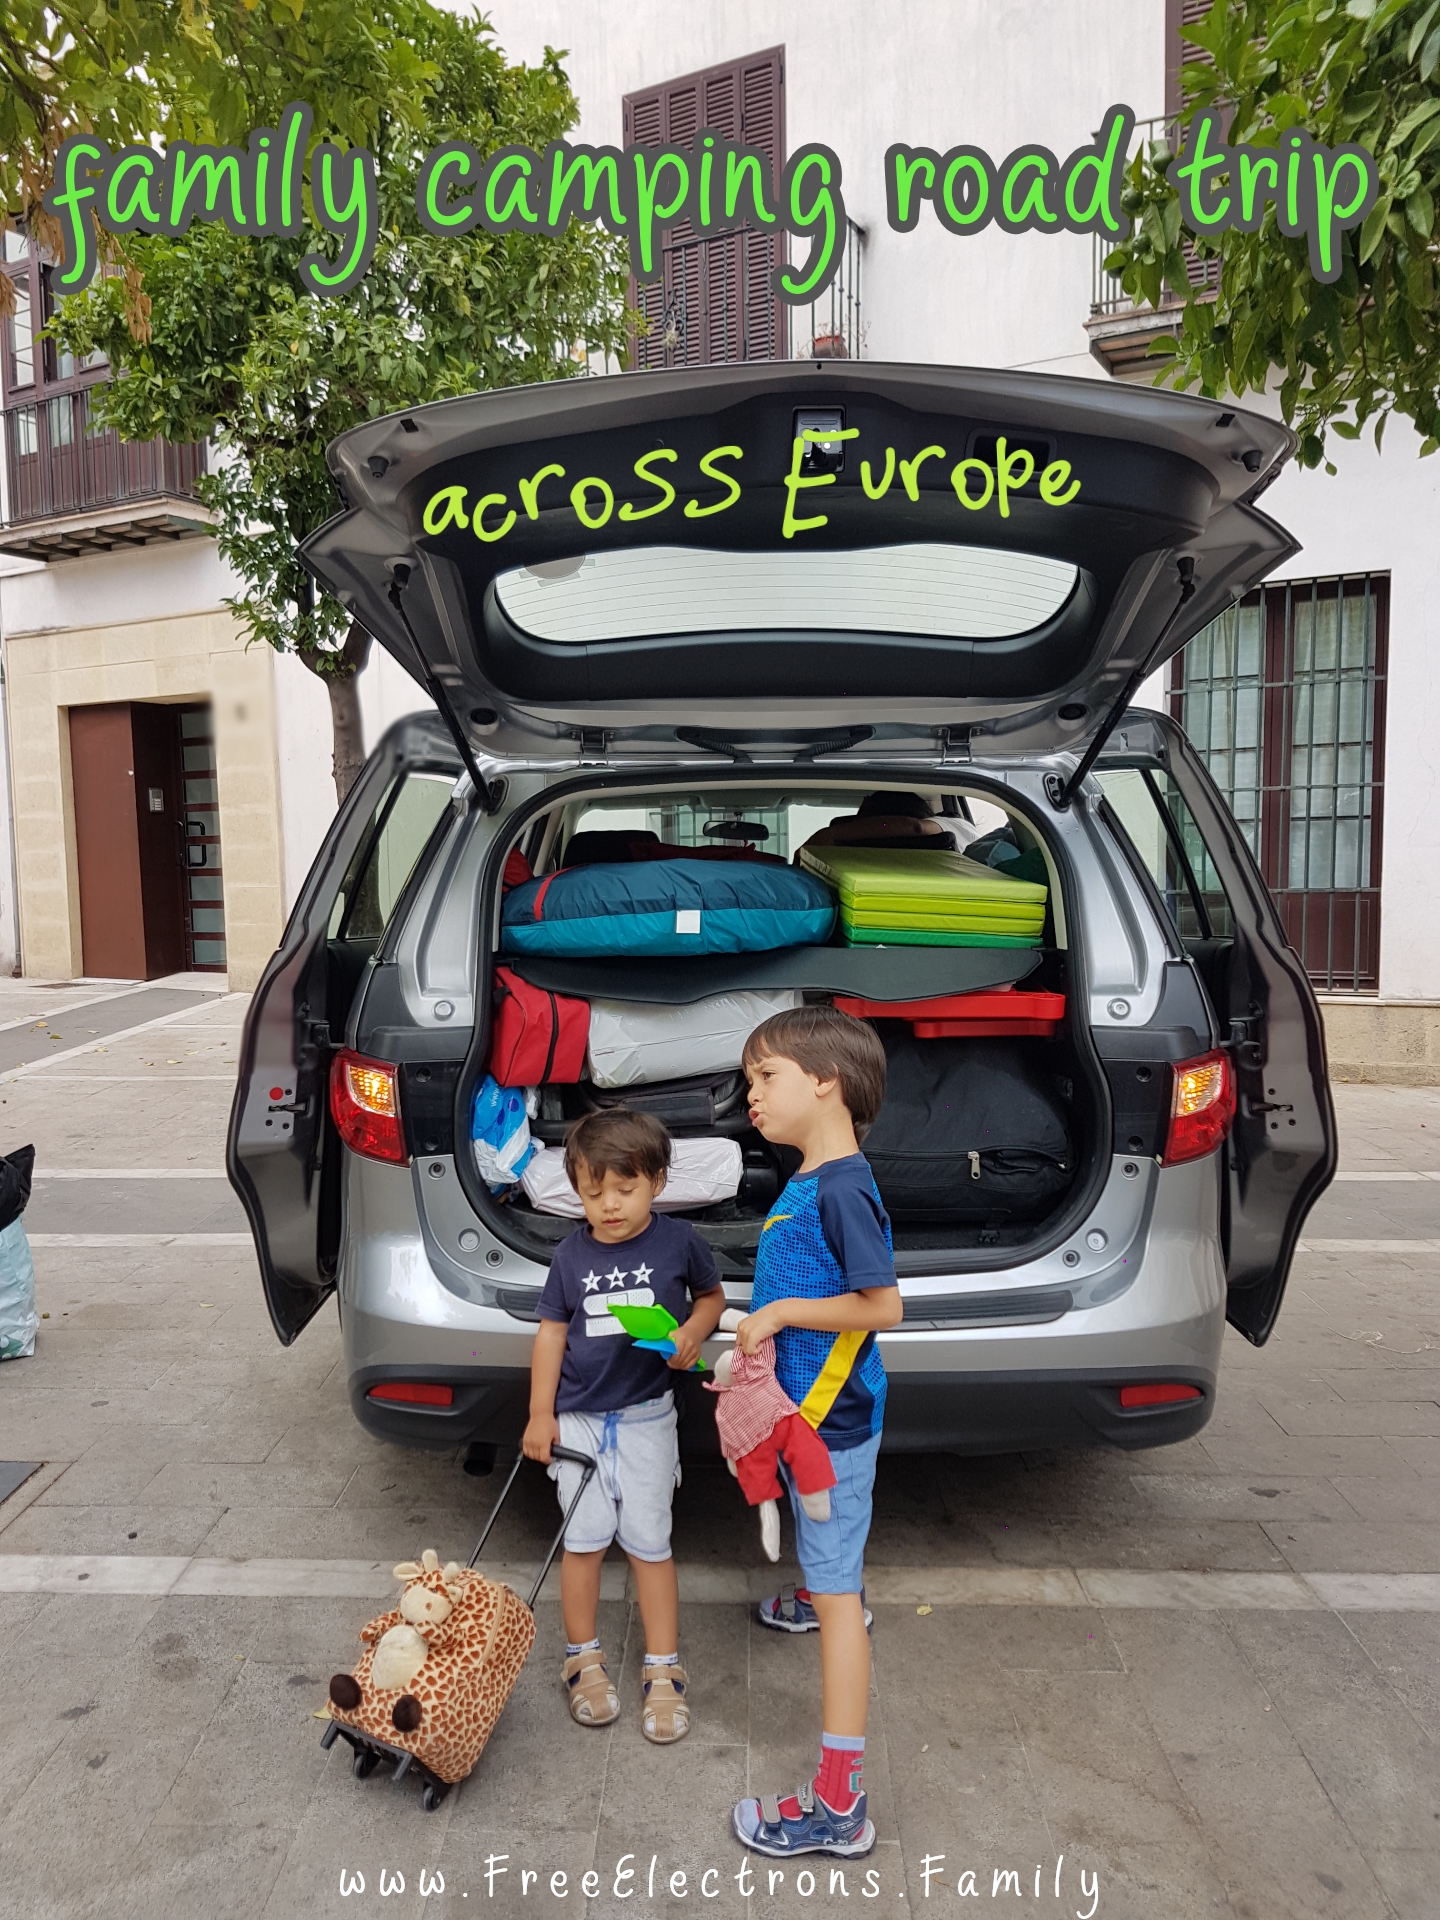 #FreeElectrons.Family - camping road trip Europe, Spain.

2 young kids in t-shirts and shorts await to get on a fully packed Mazda 5 to start their family fun summer camping road trip across Europe.